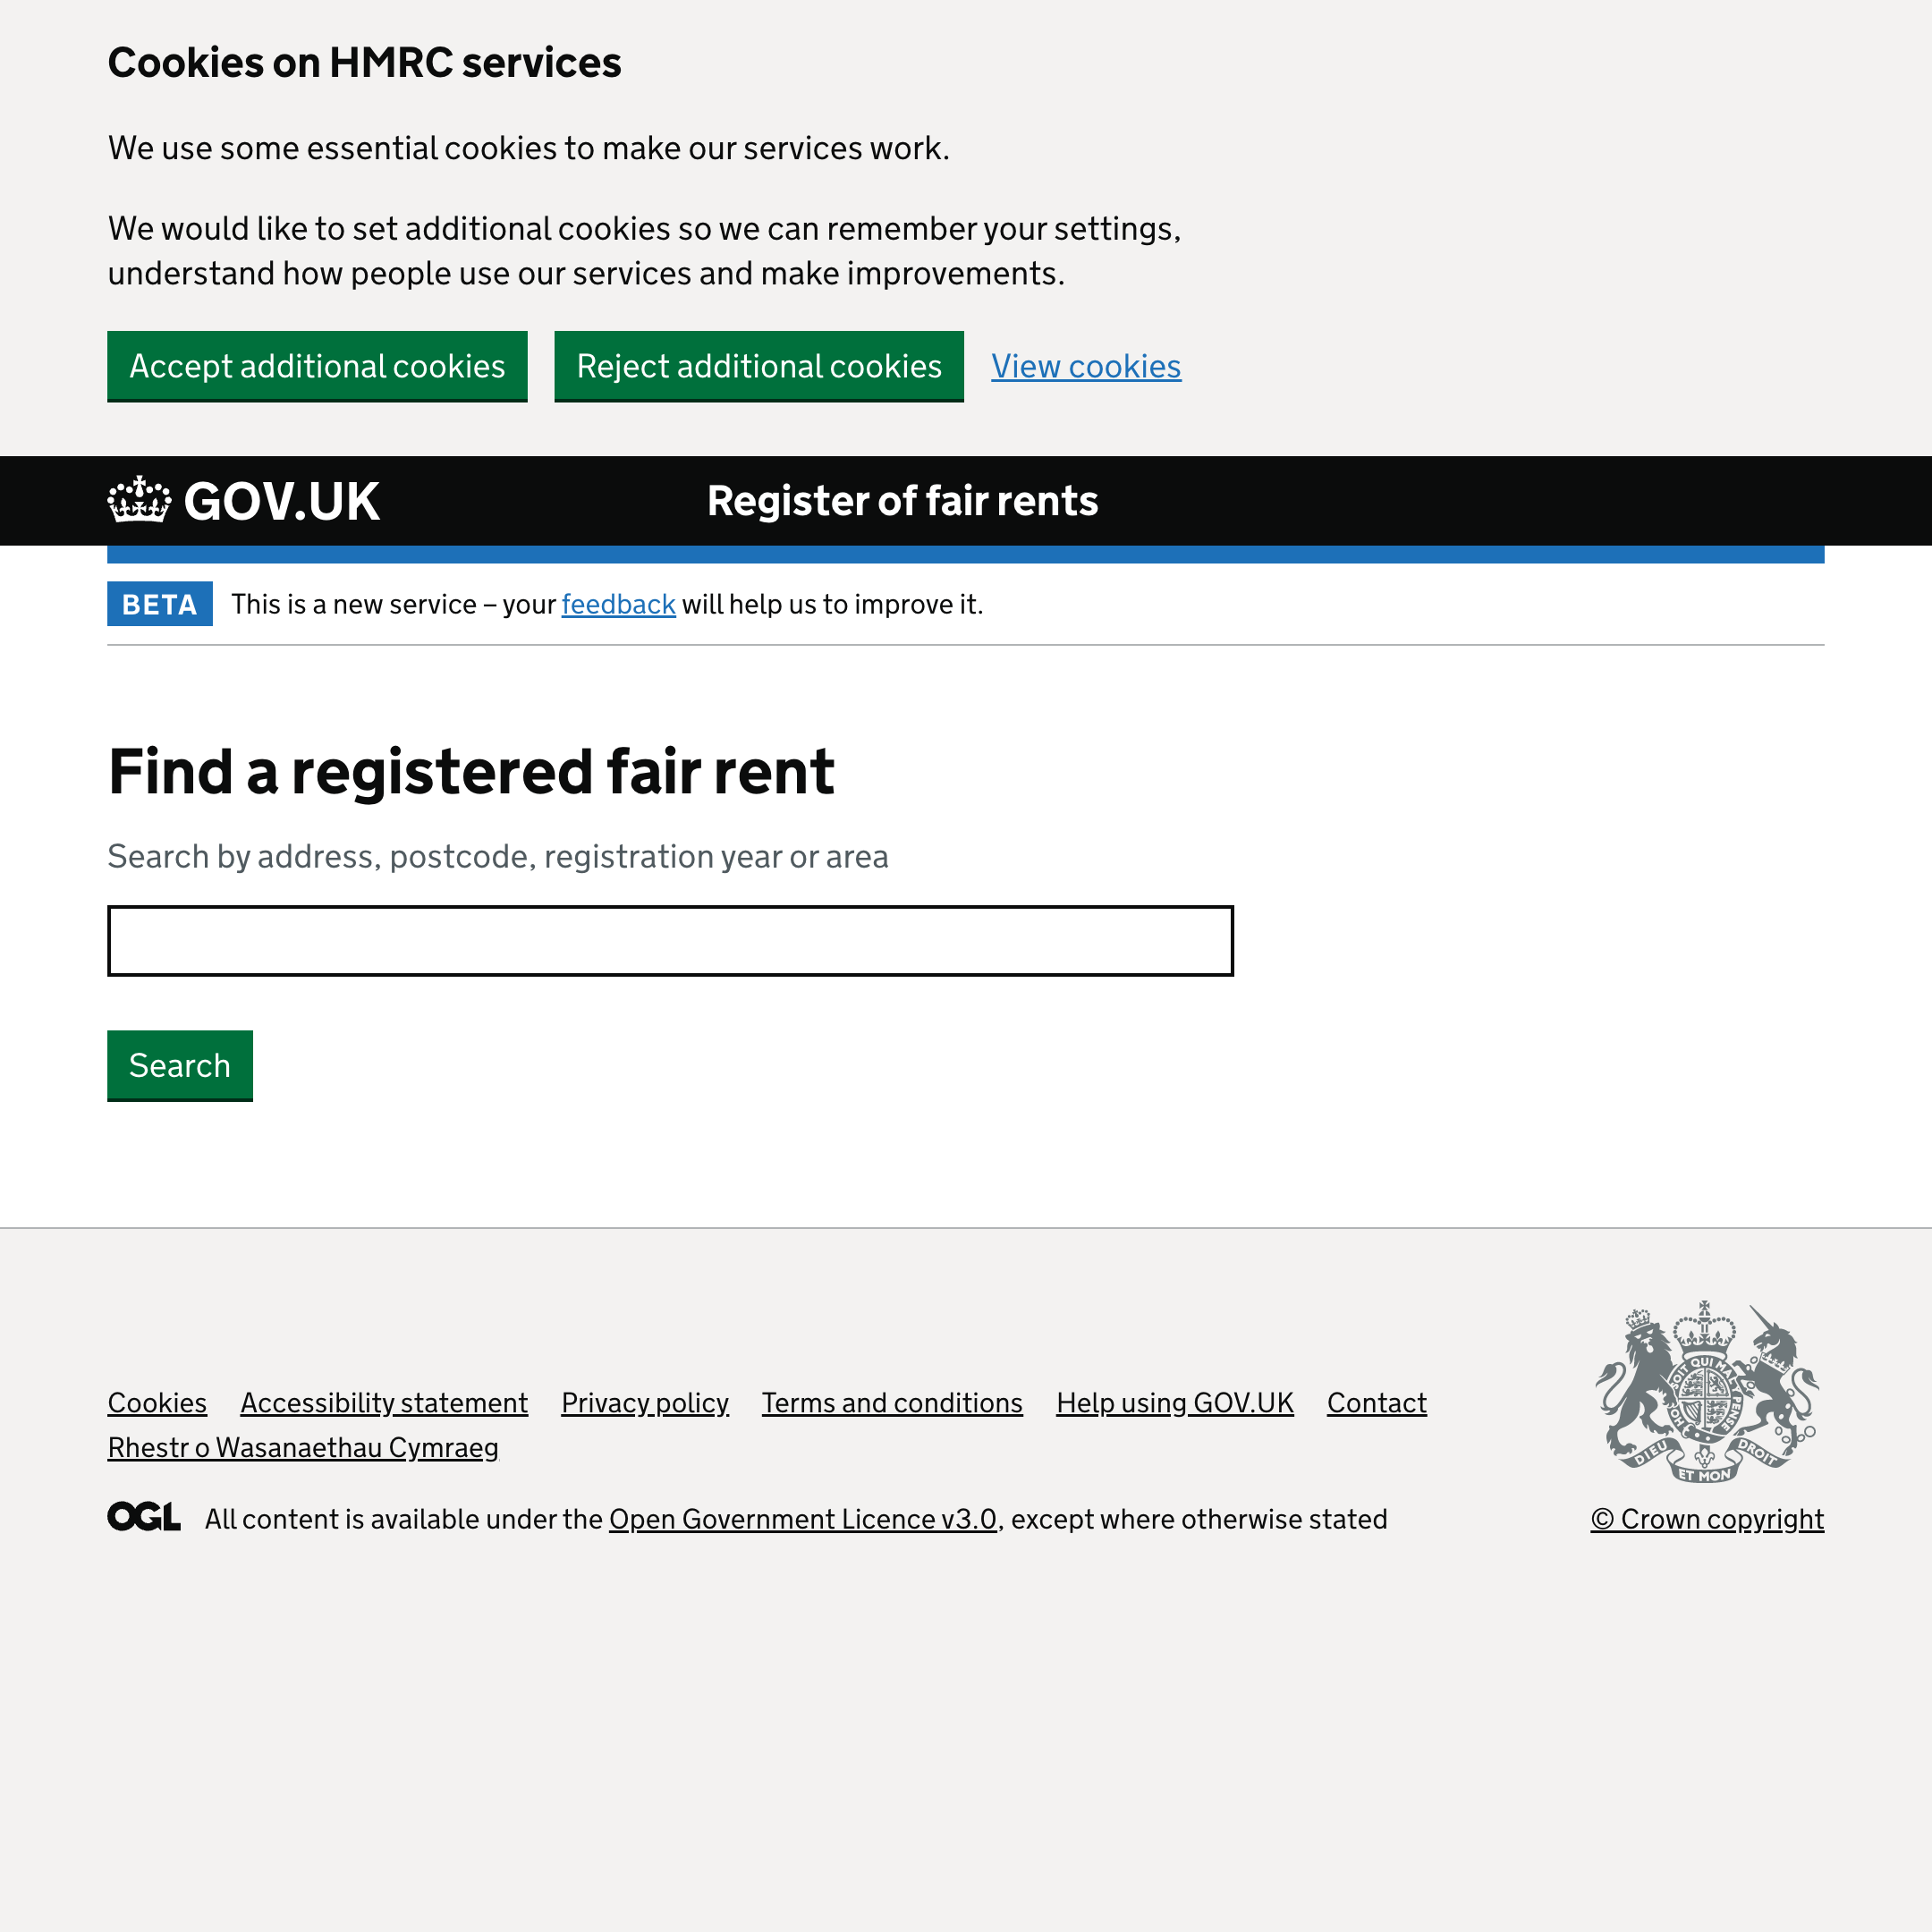 Check the register of fair rents